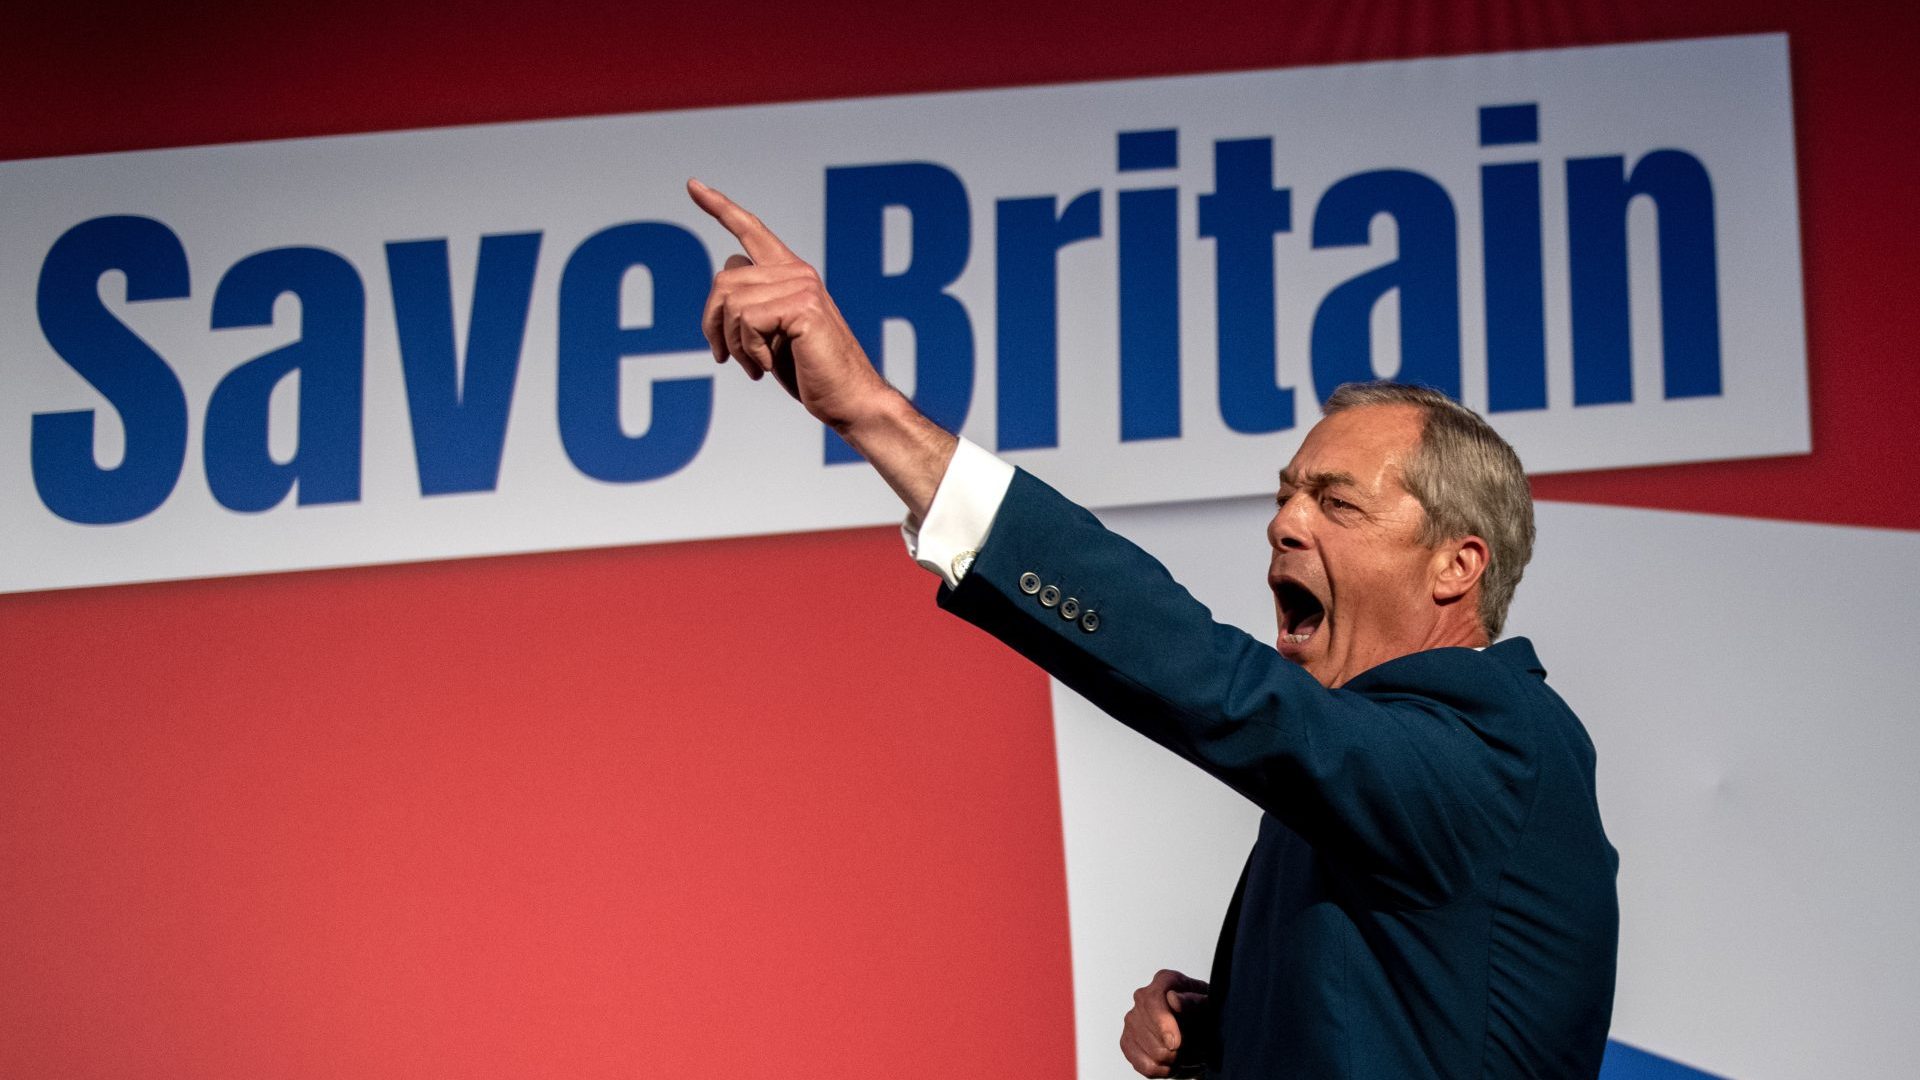 Nigel Farage, speaks at the Reform Party annual conference in 2023 (Photo by Chris J Ratcliffe/Getty Images)